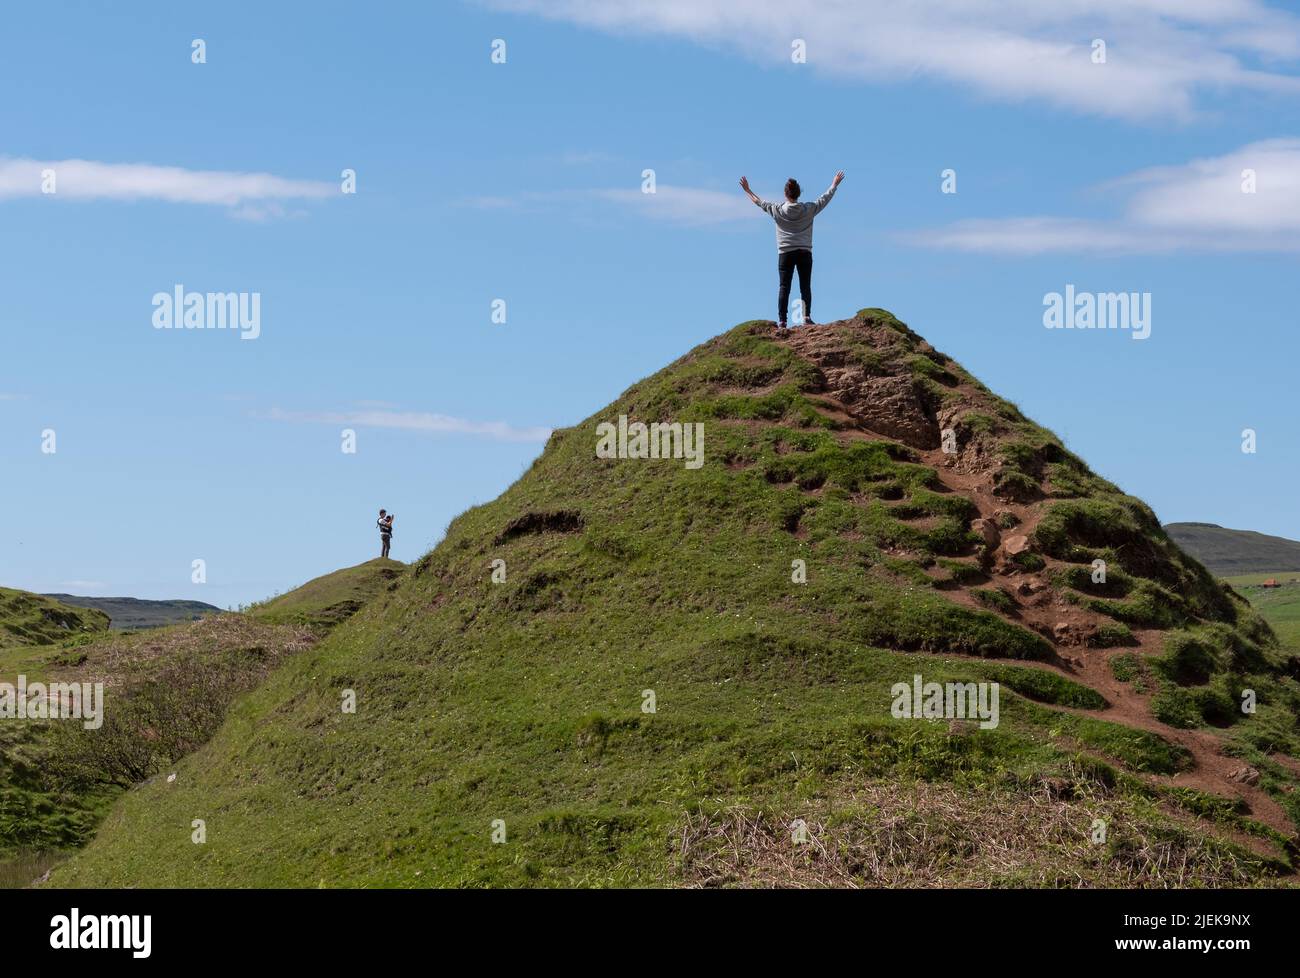 Tourists at Fairy Glen on Trotternish Peninsula. Varied landscape with hills, valleys and basalt cliffs in  north of Skye. Area suffers overtourism. Stock Photo